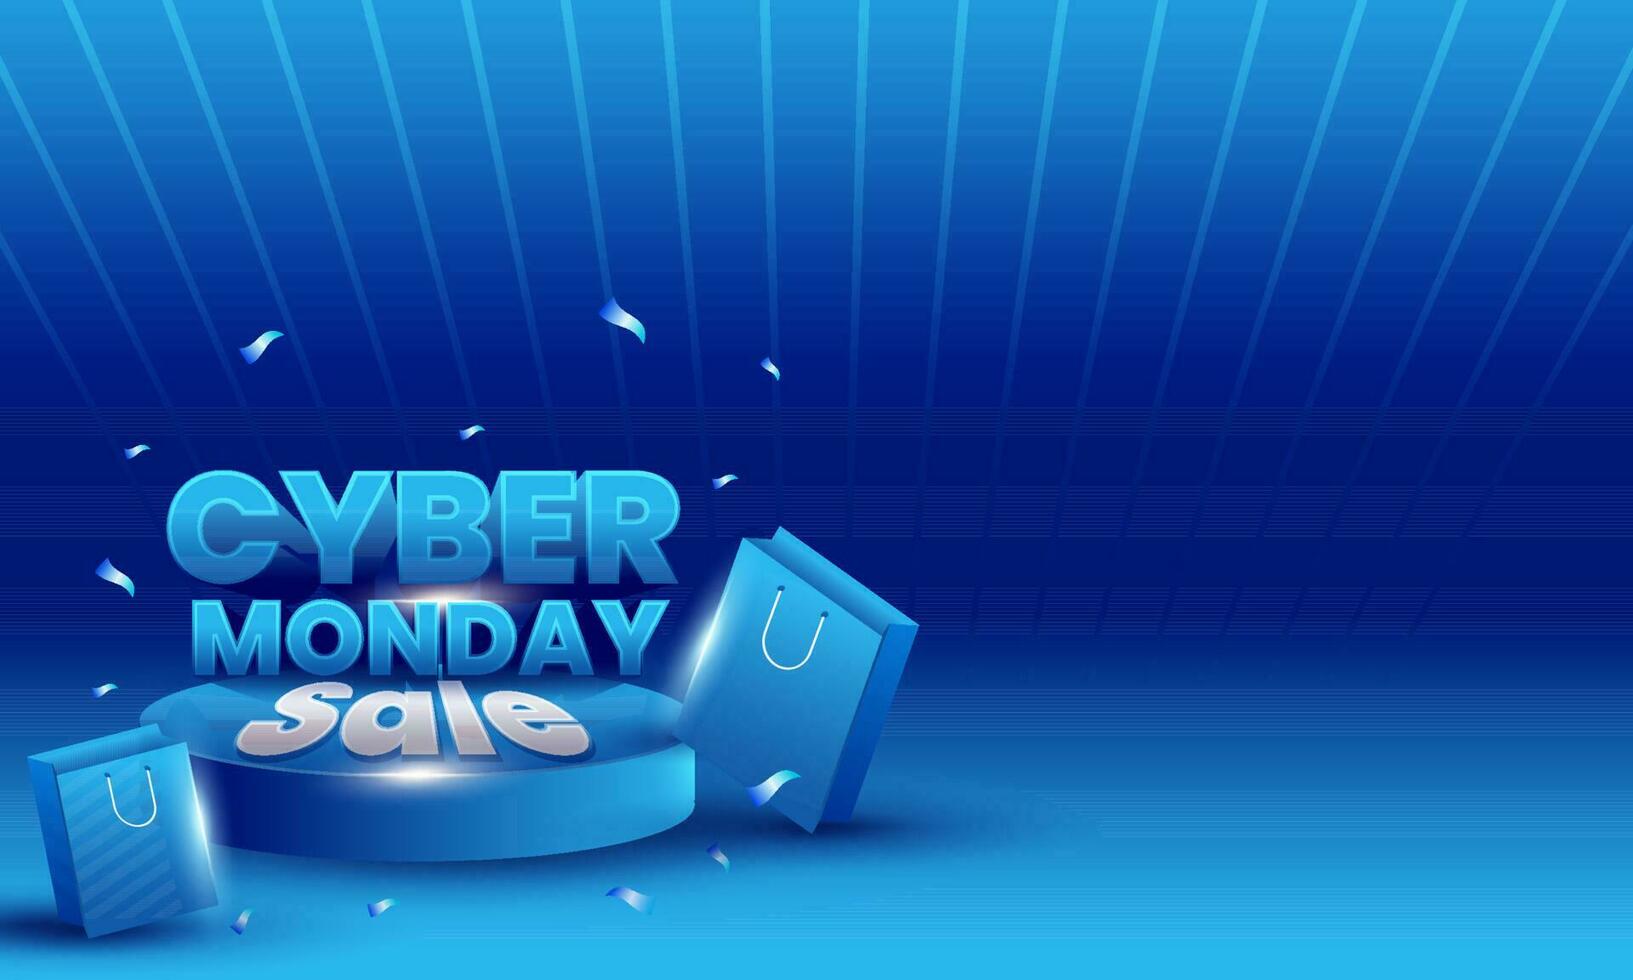 Cyber Monday Sale Banner Design With Shopping Bags, Confetti And Podium On Blue Strip Background. vector